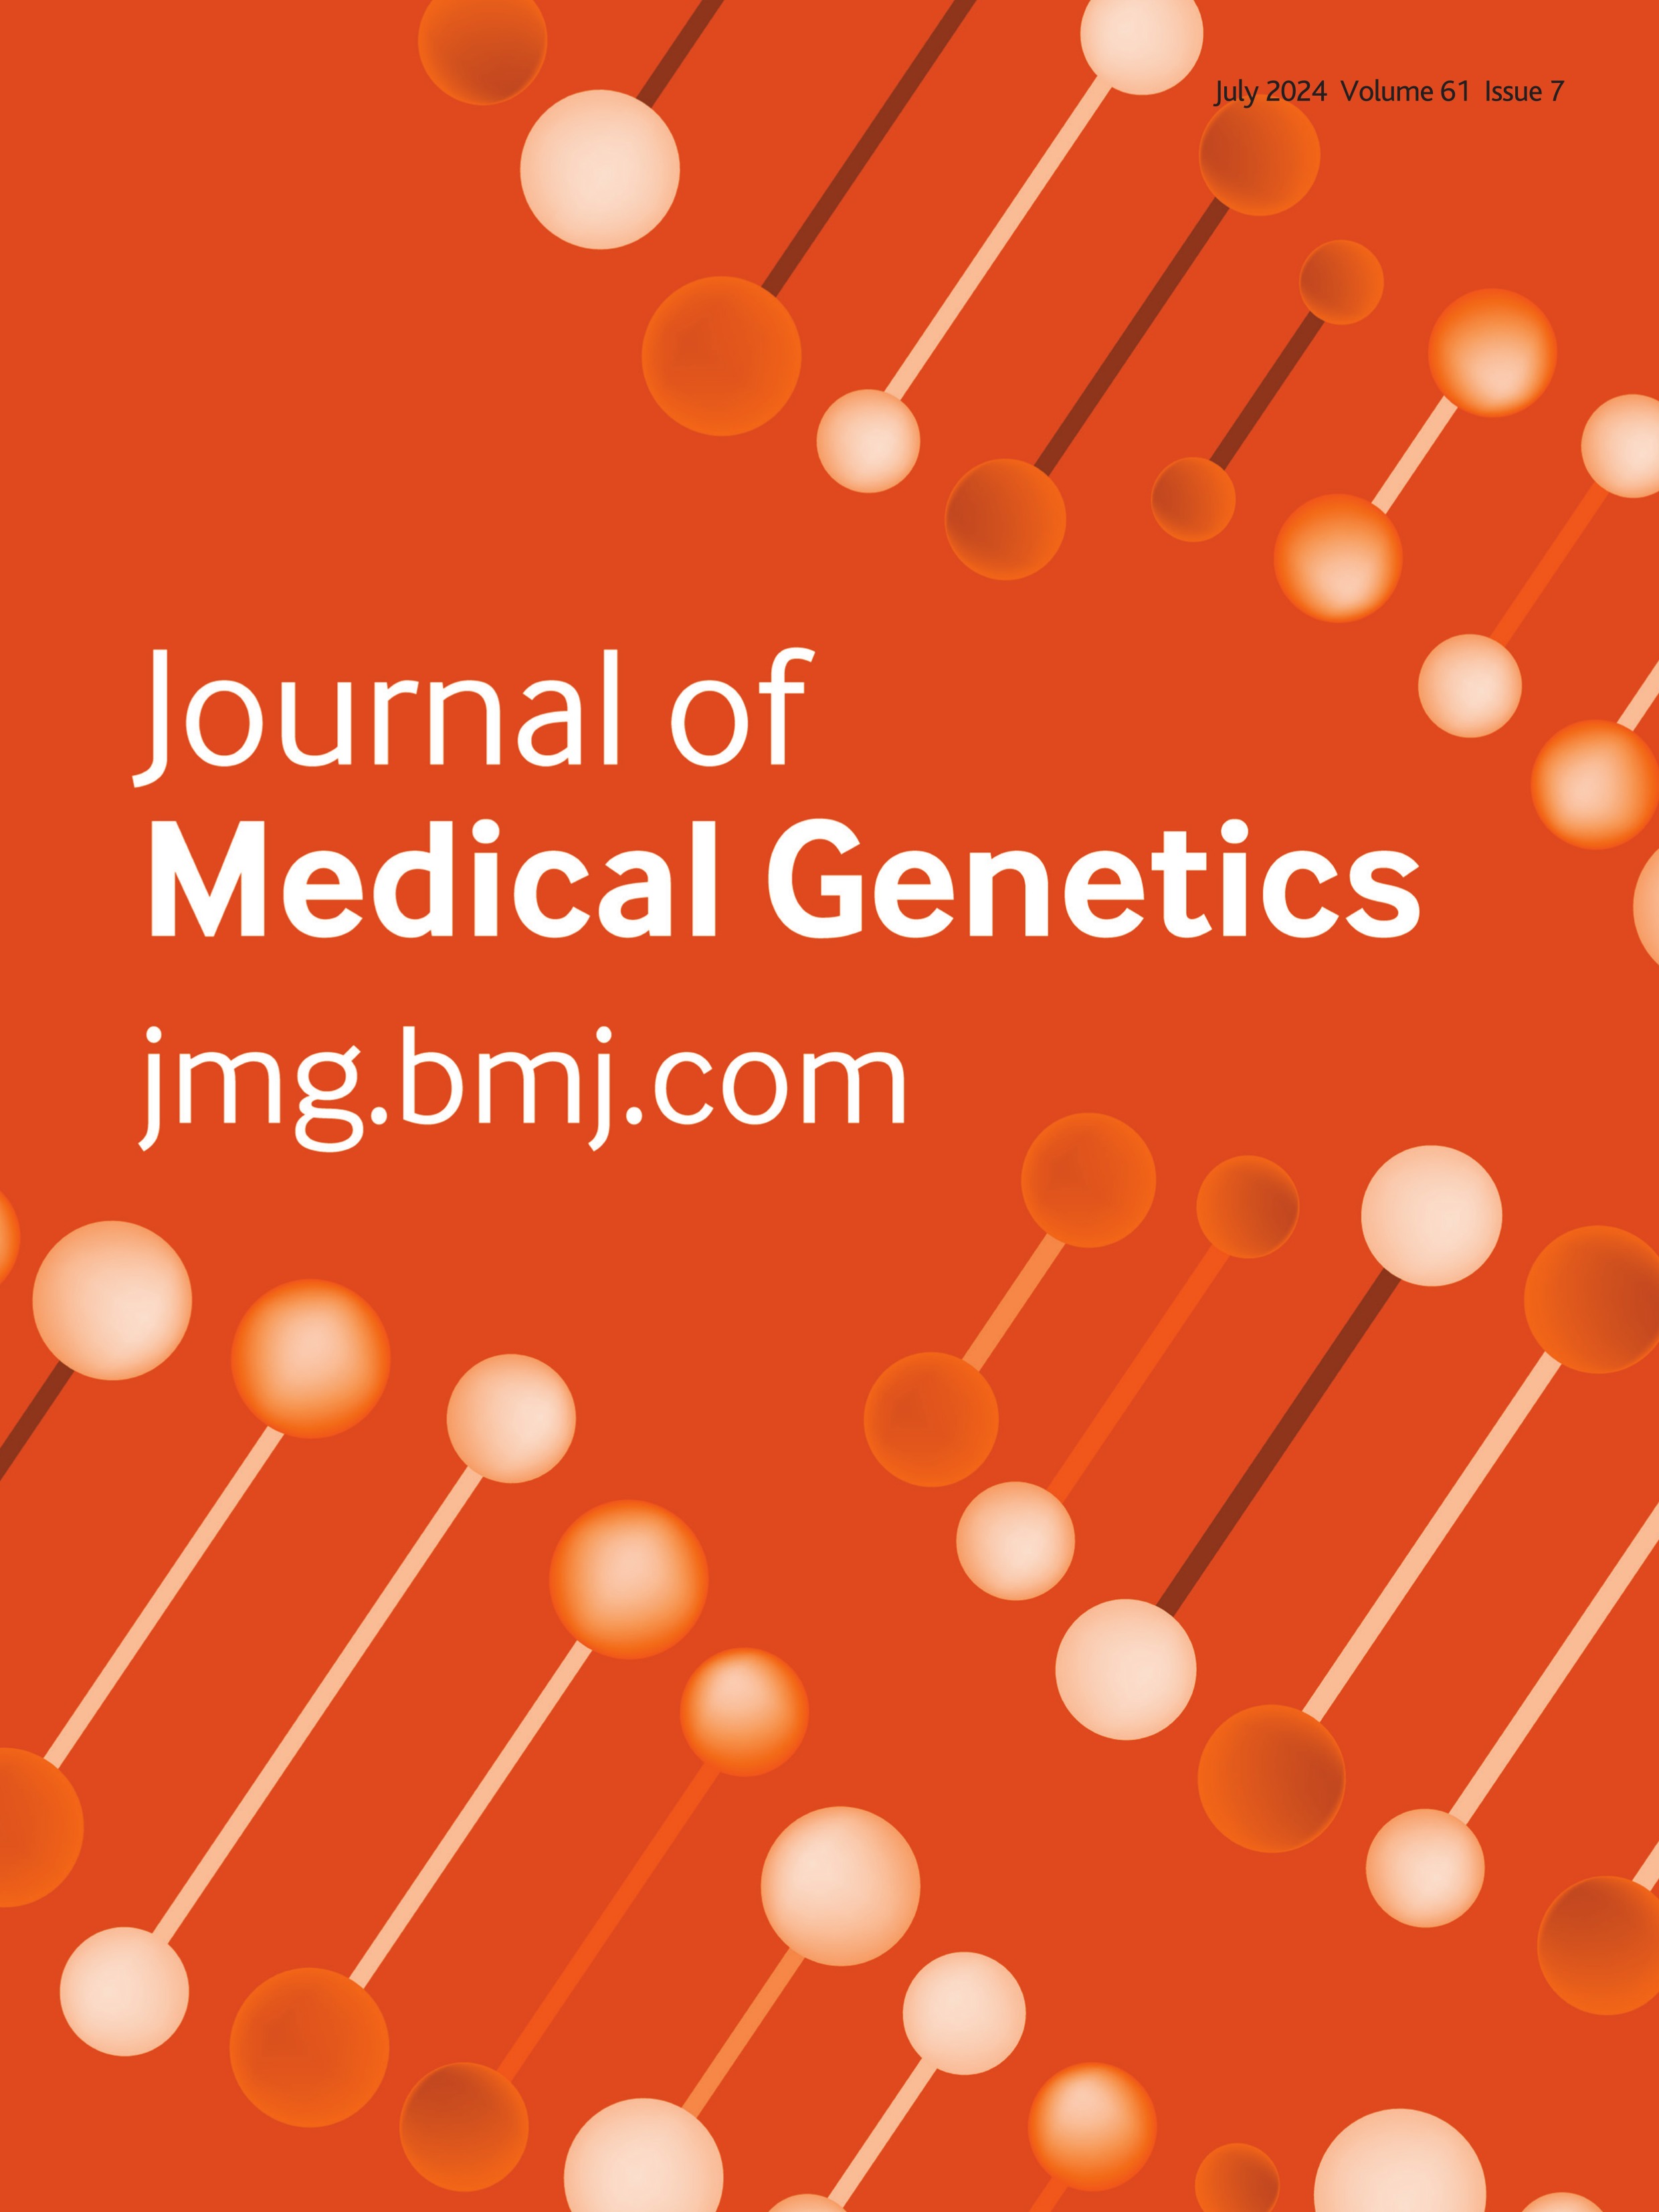 BRCA awareness and testing experience in the UK Jewish population: a qualitative study